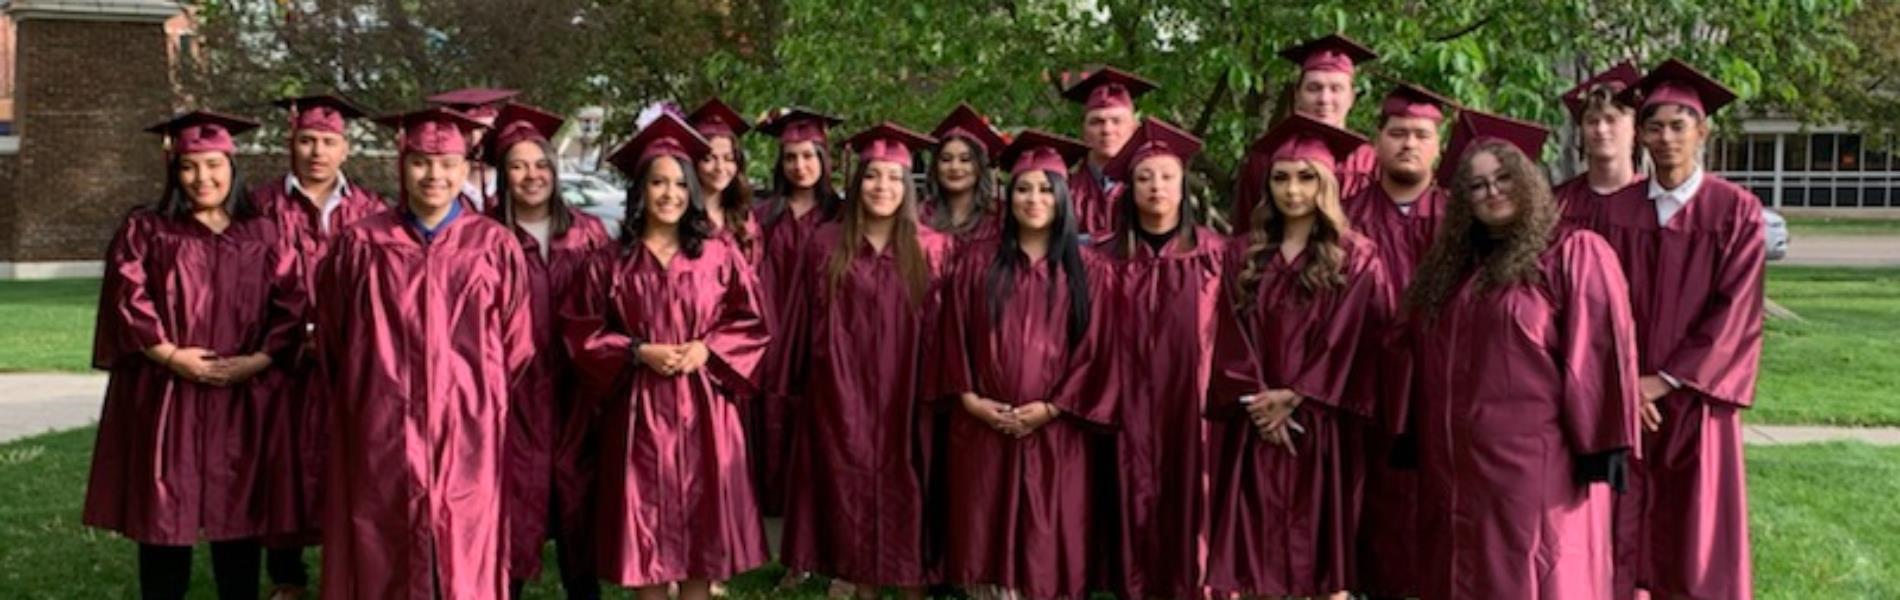 Eighteen graduates in maroon cap and gowns stand under trees in a park. They are standing in a single row.